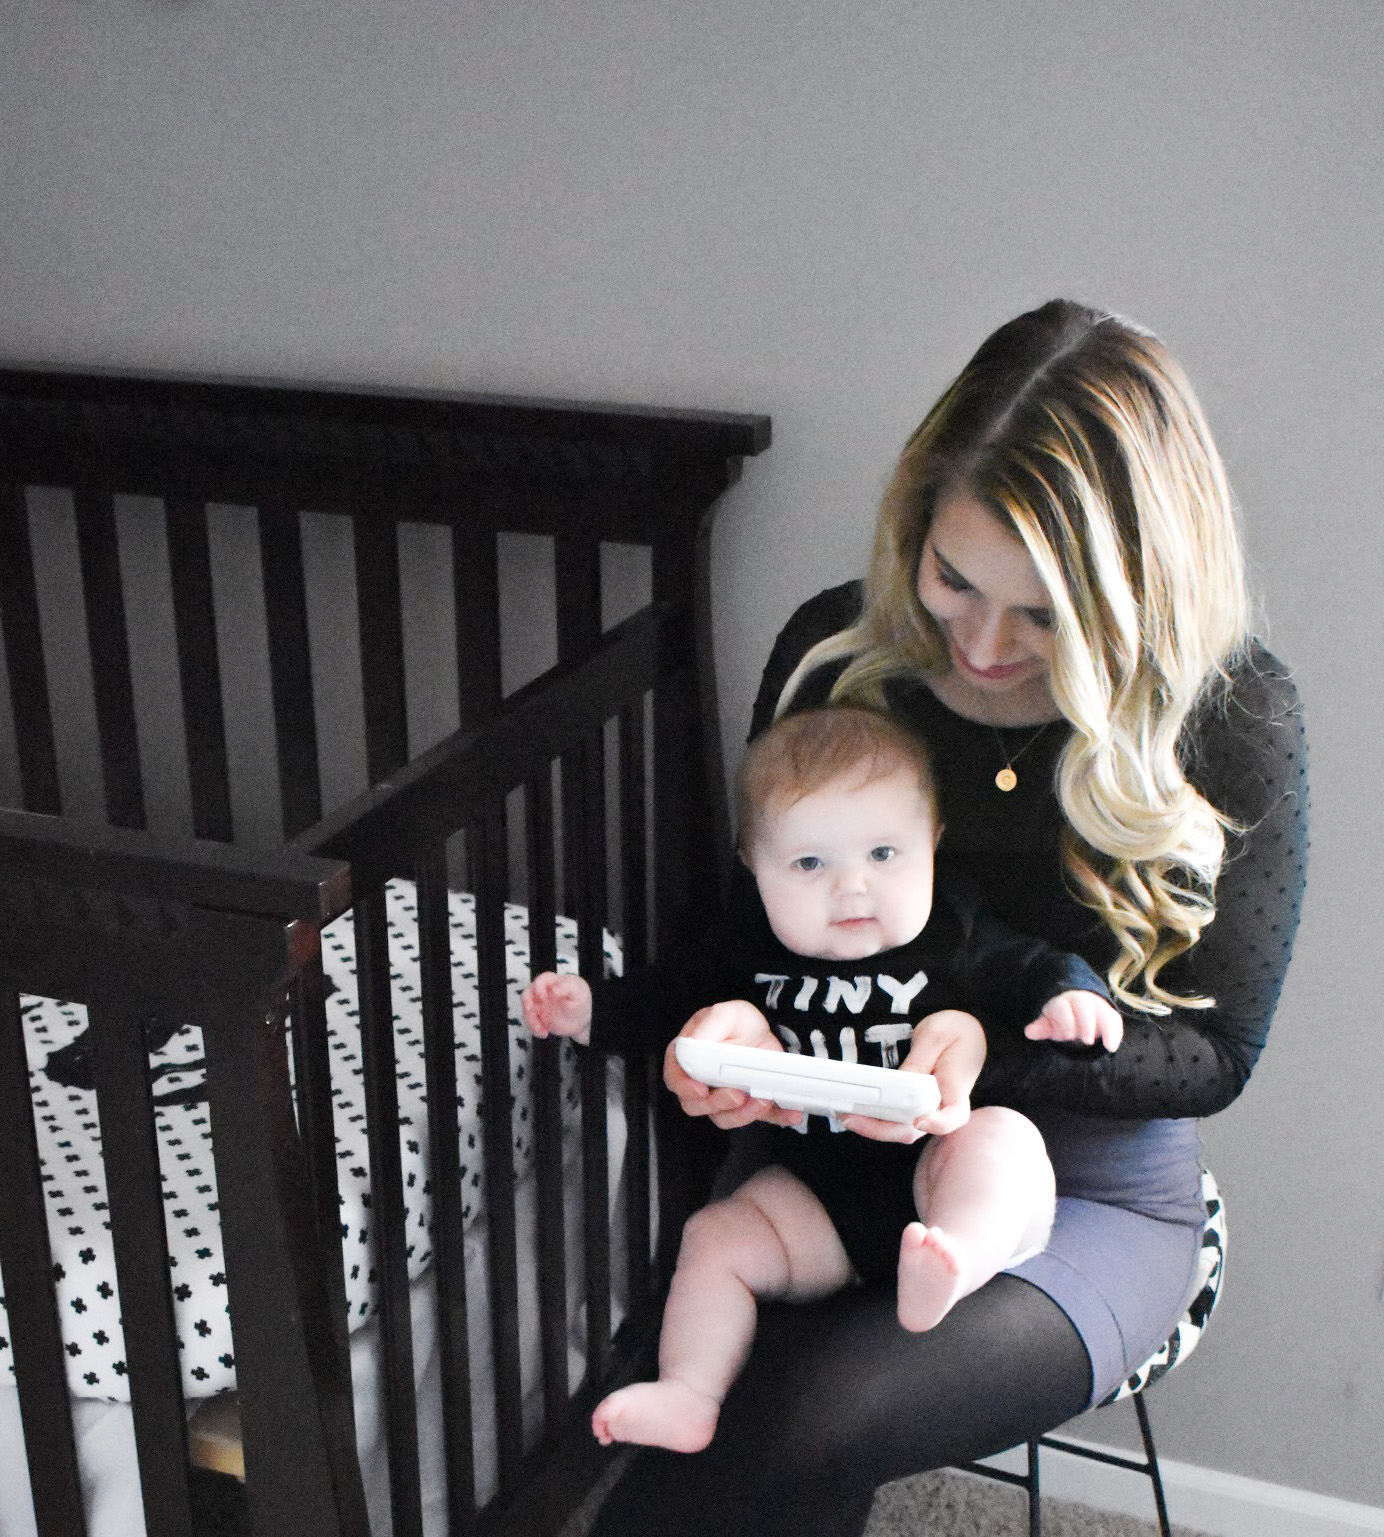 How to Transition Baby to Nursery: It's a big change for everyone when the time has come to get Baby to sleep in his own room! Moving from parents' room to nursery is a big step, and it's important to navigate the transition to crib sleeping carefully. A mom of 2 shares how her family successfully navigated the transitioning Baby to sleeping in nursery with minimal stress! [ad] #MyVTechNursery